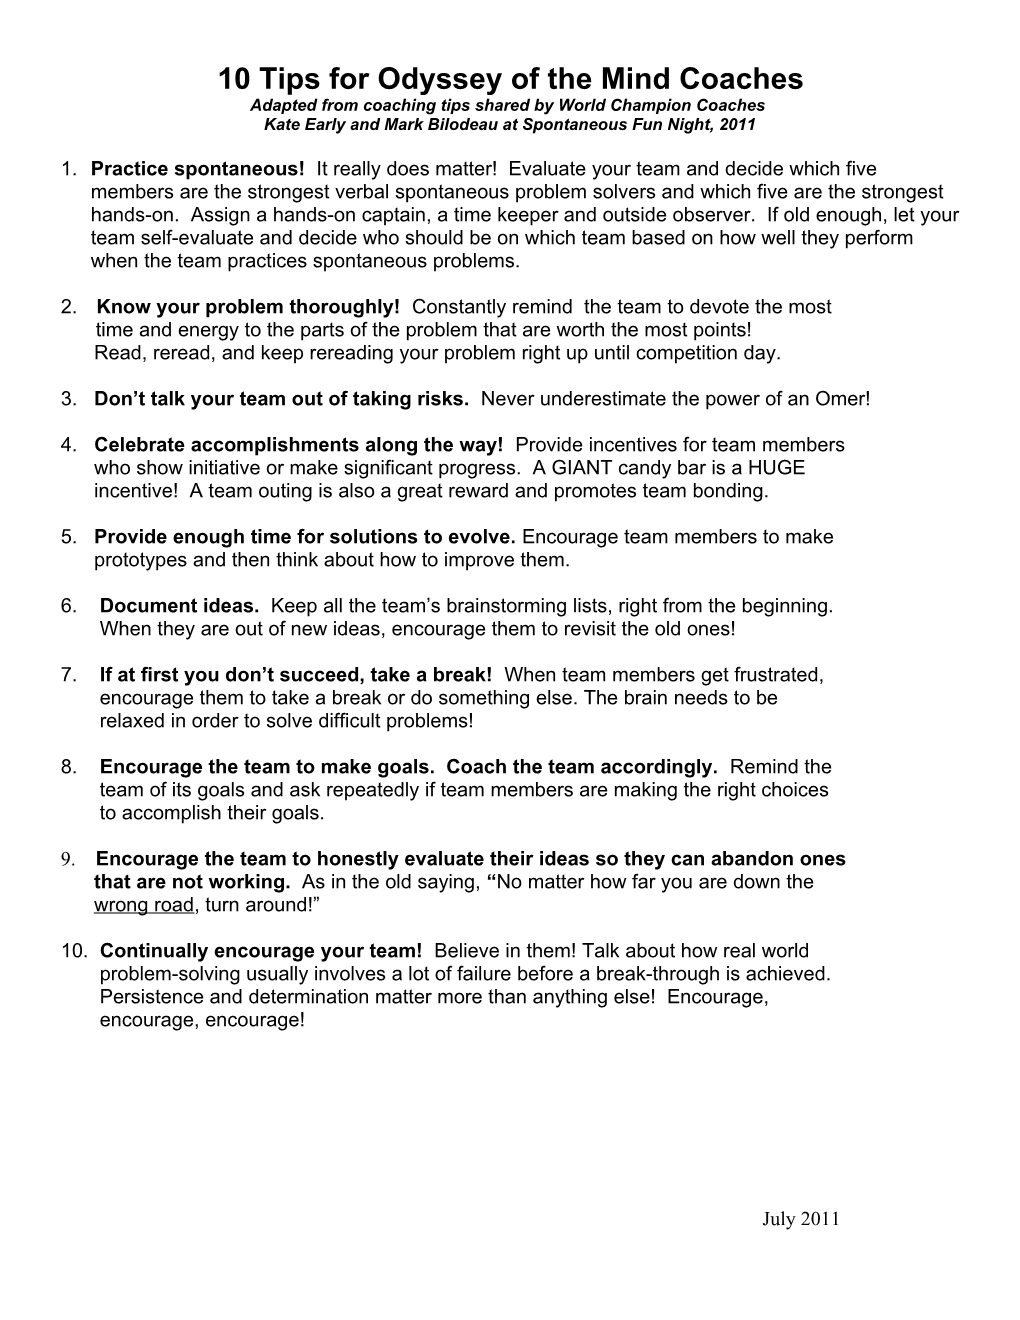 10 Tips for Odyssey of the Mind Coaches Adapted from Coaching Tips Shared by World Champion